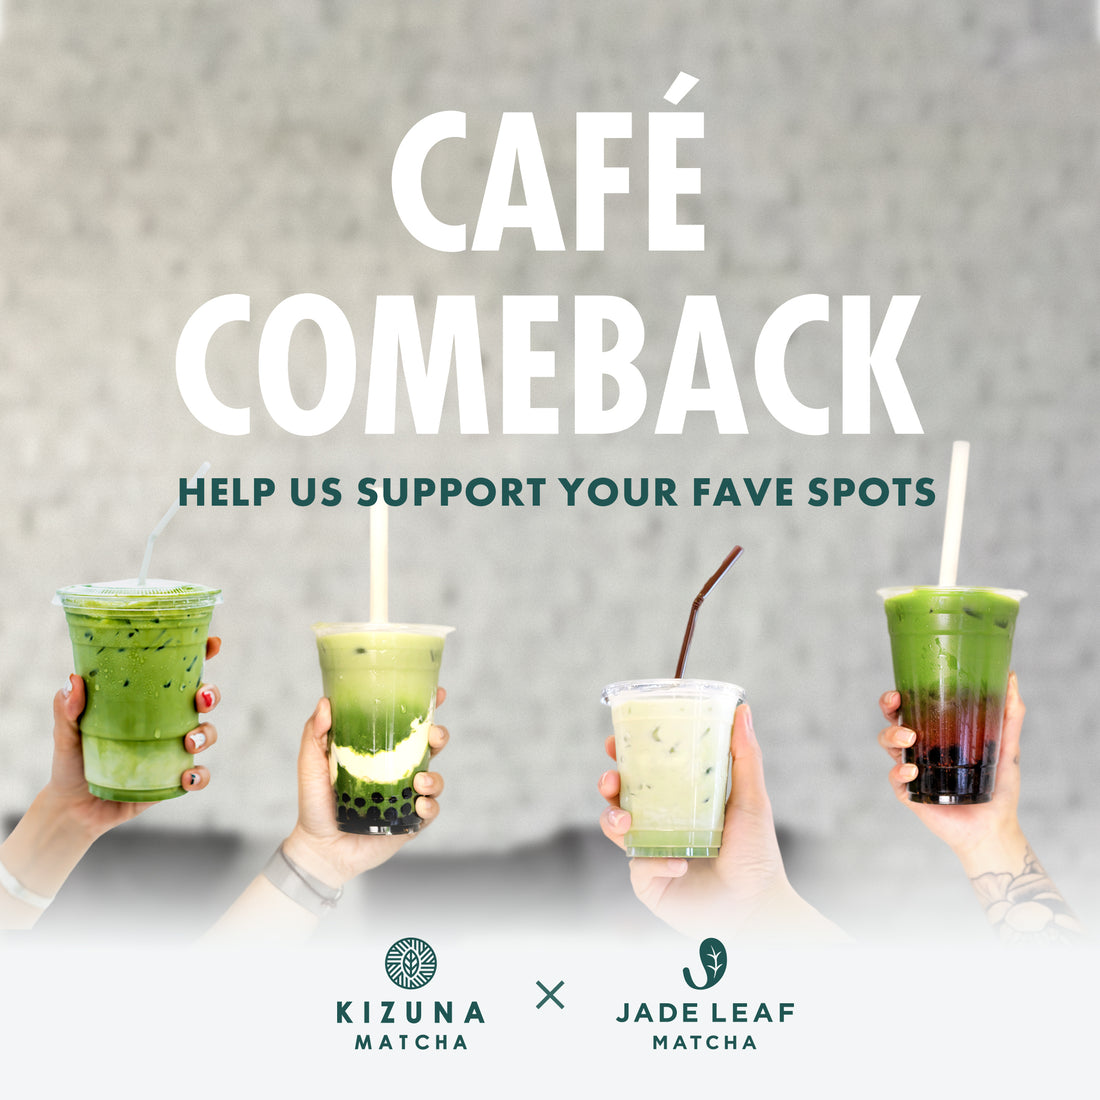 Introducing the Cafe Comeback Program: We need YOUR help!